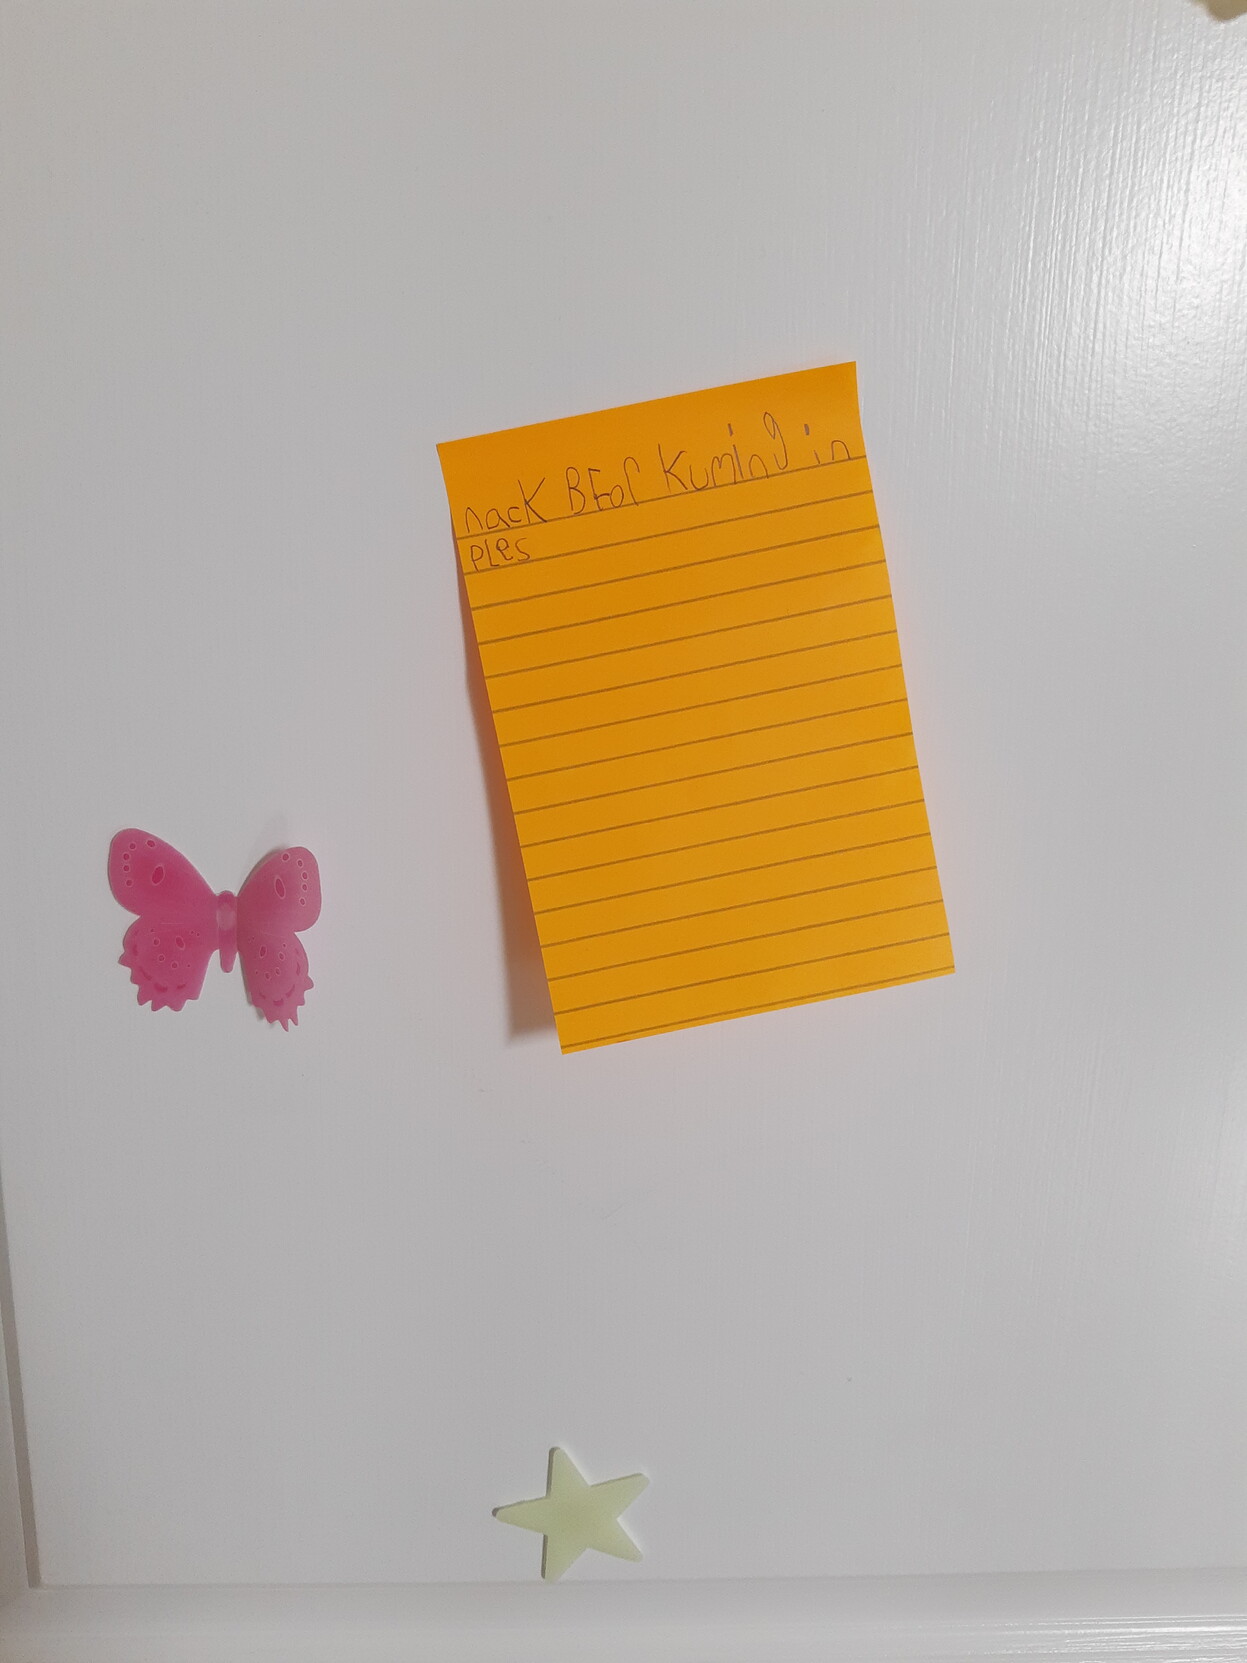 An orange post it note on a door that says "nacK BFor Kuming in PLes"